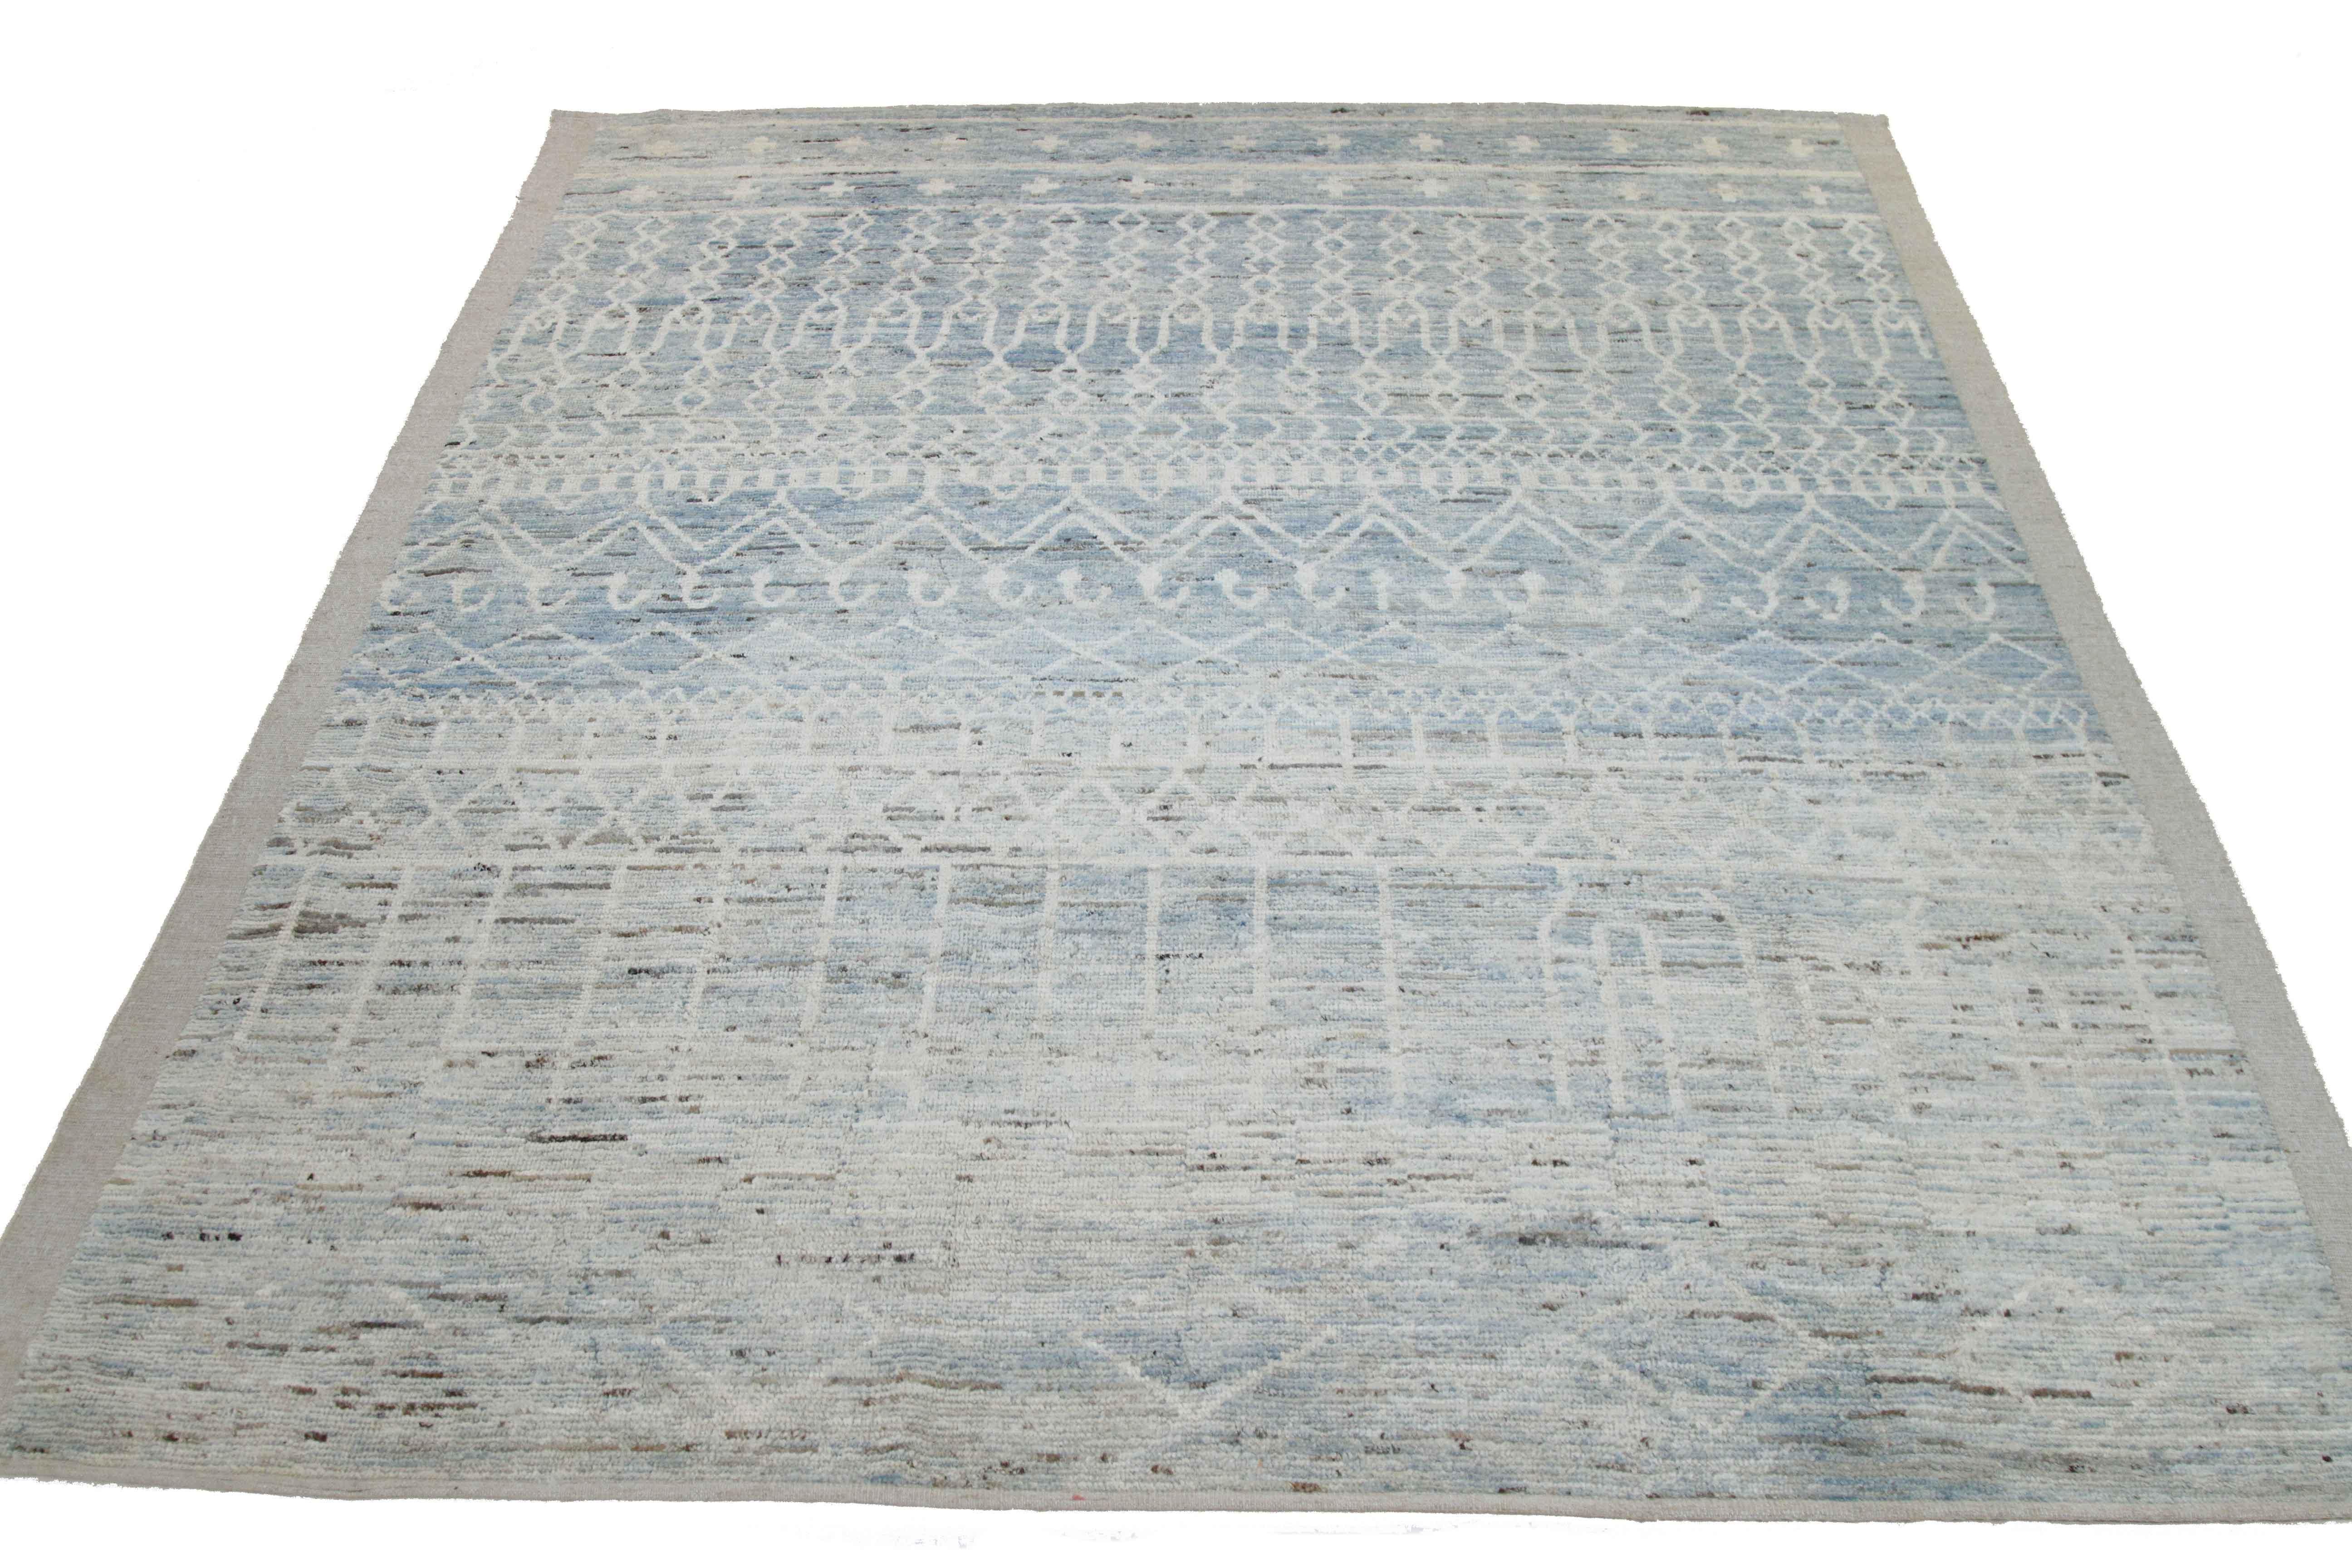 Modern Afghan rug handwoven from the finest sheep’s wool and colored with all-natural vegetable dyes that are safe for humans and pets. It’s a traditional Afghan weaving featuring a Moroccan inspired design highlighted by tribal details in ivory and